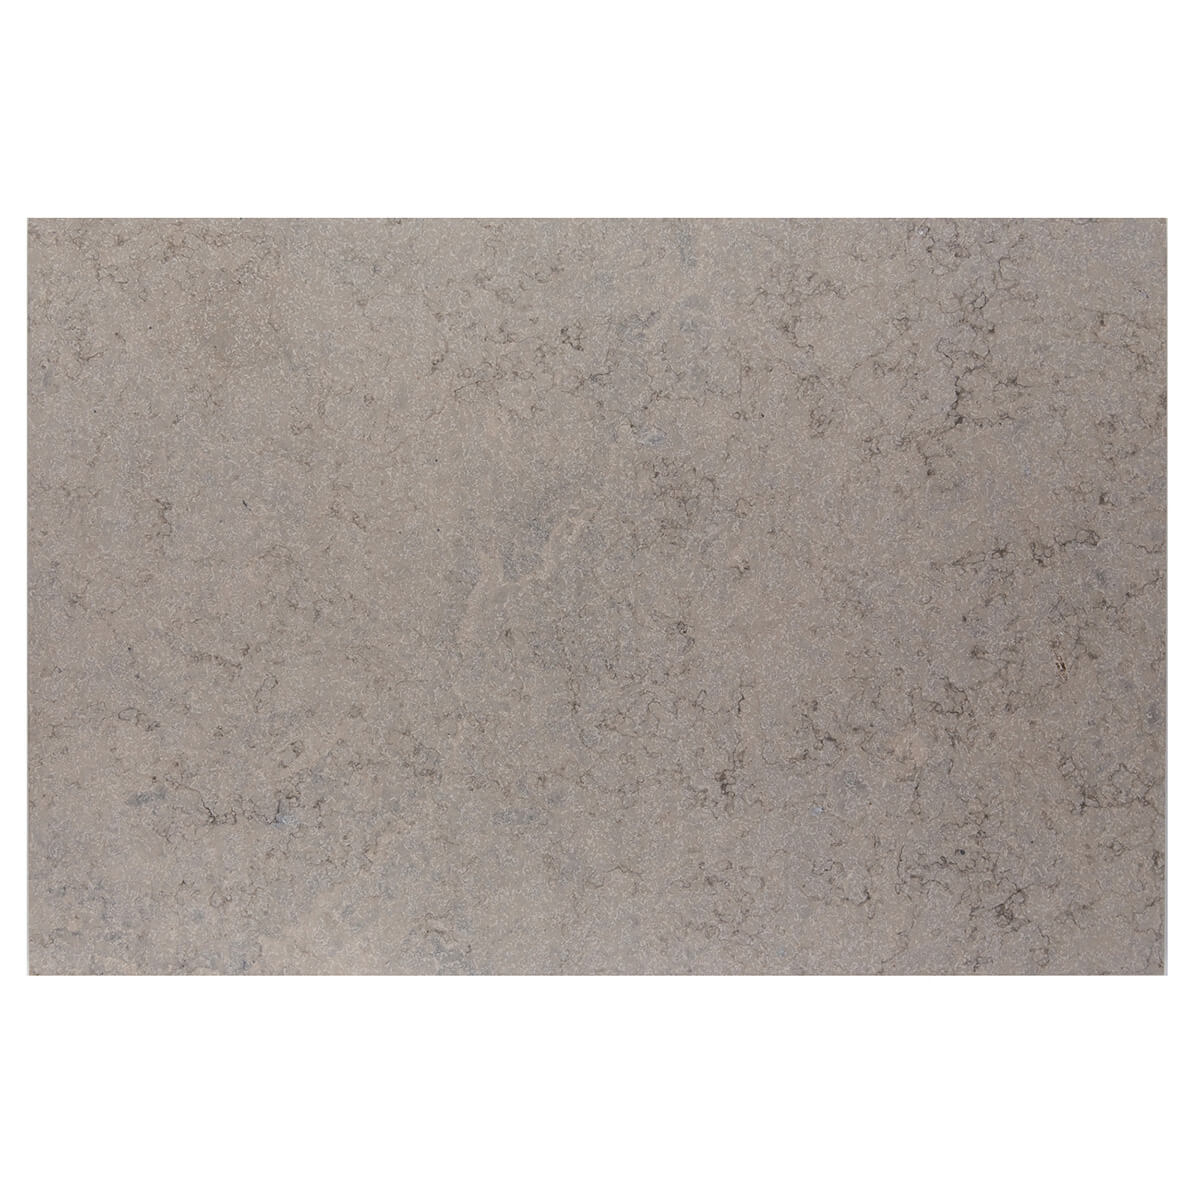 London Grey Field Tile - High-quality limestone with flamed finish and worn edge, 16x24x0.625 inches